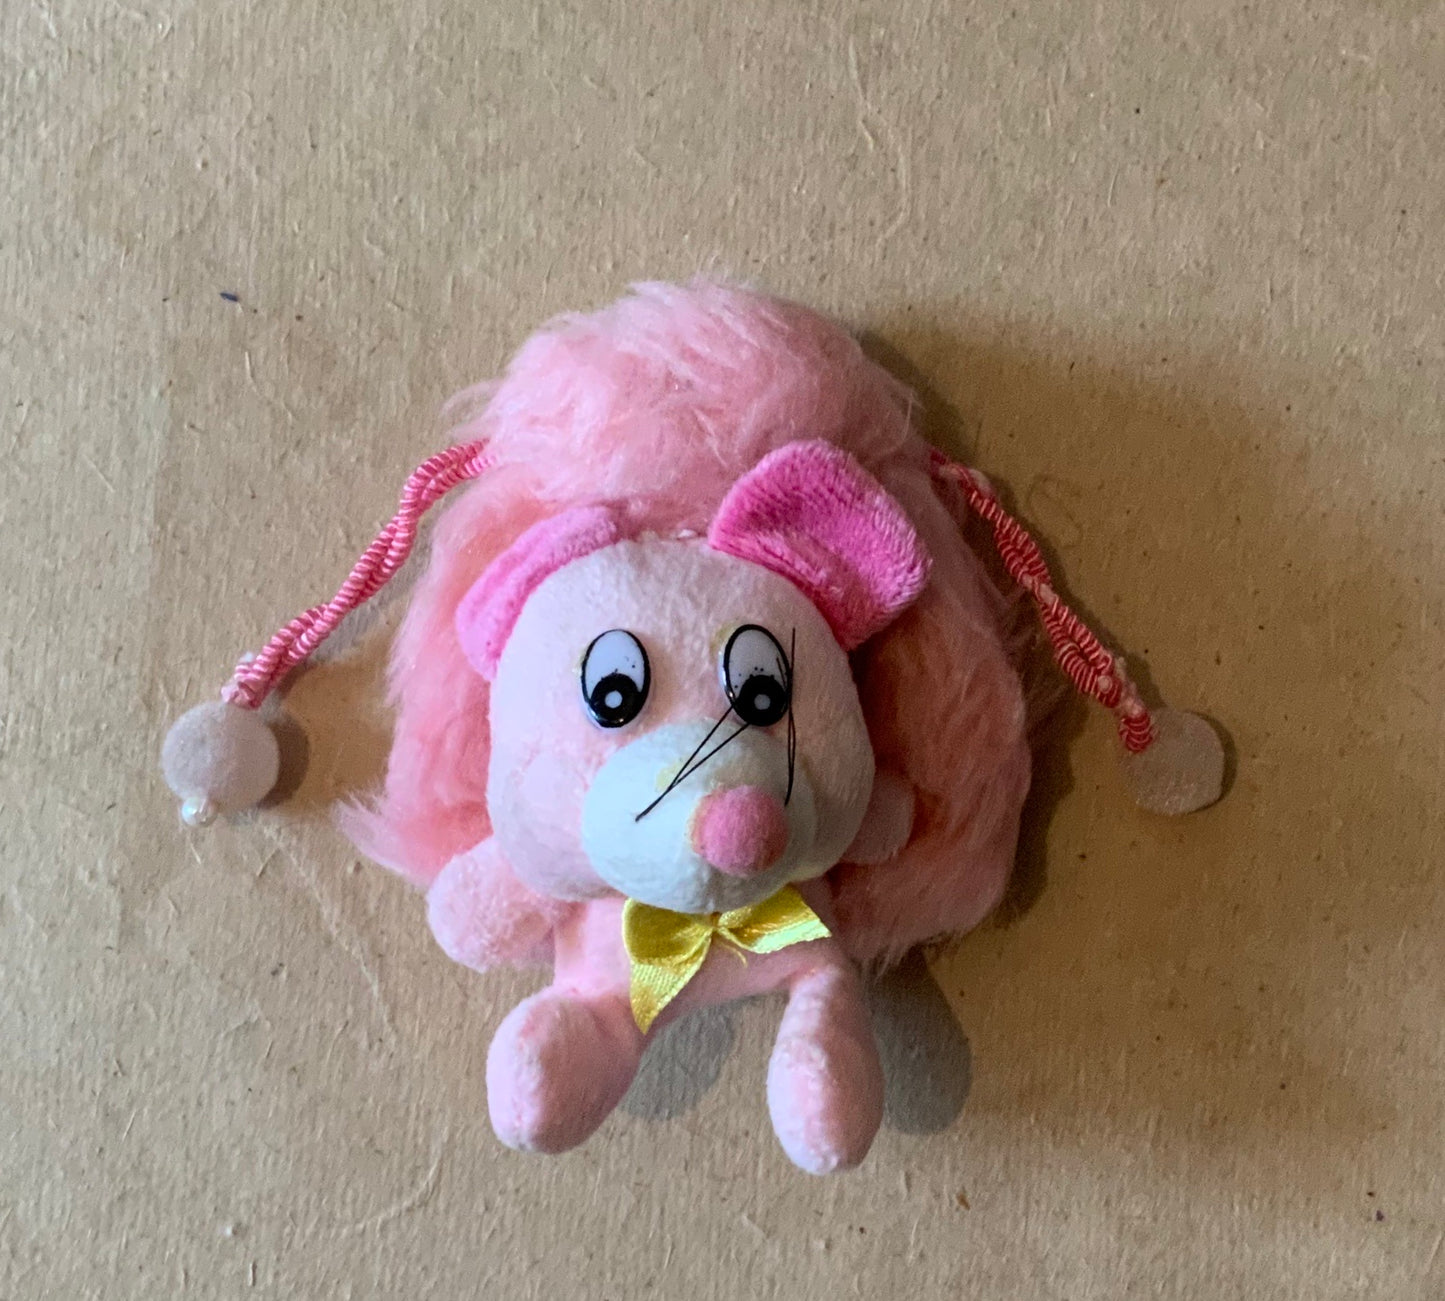 Soft toy coin pouch